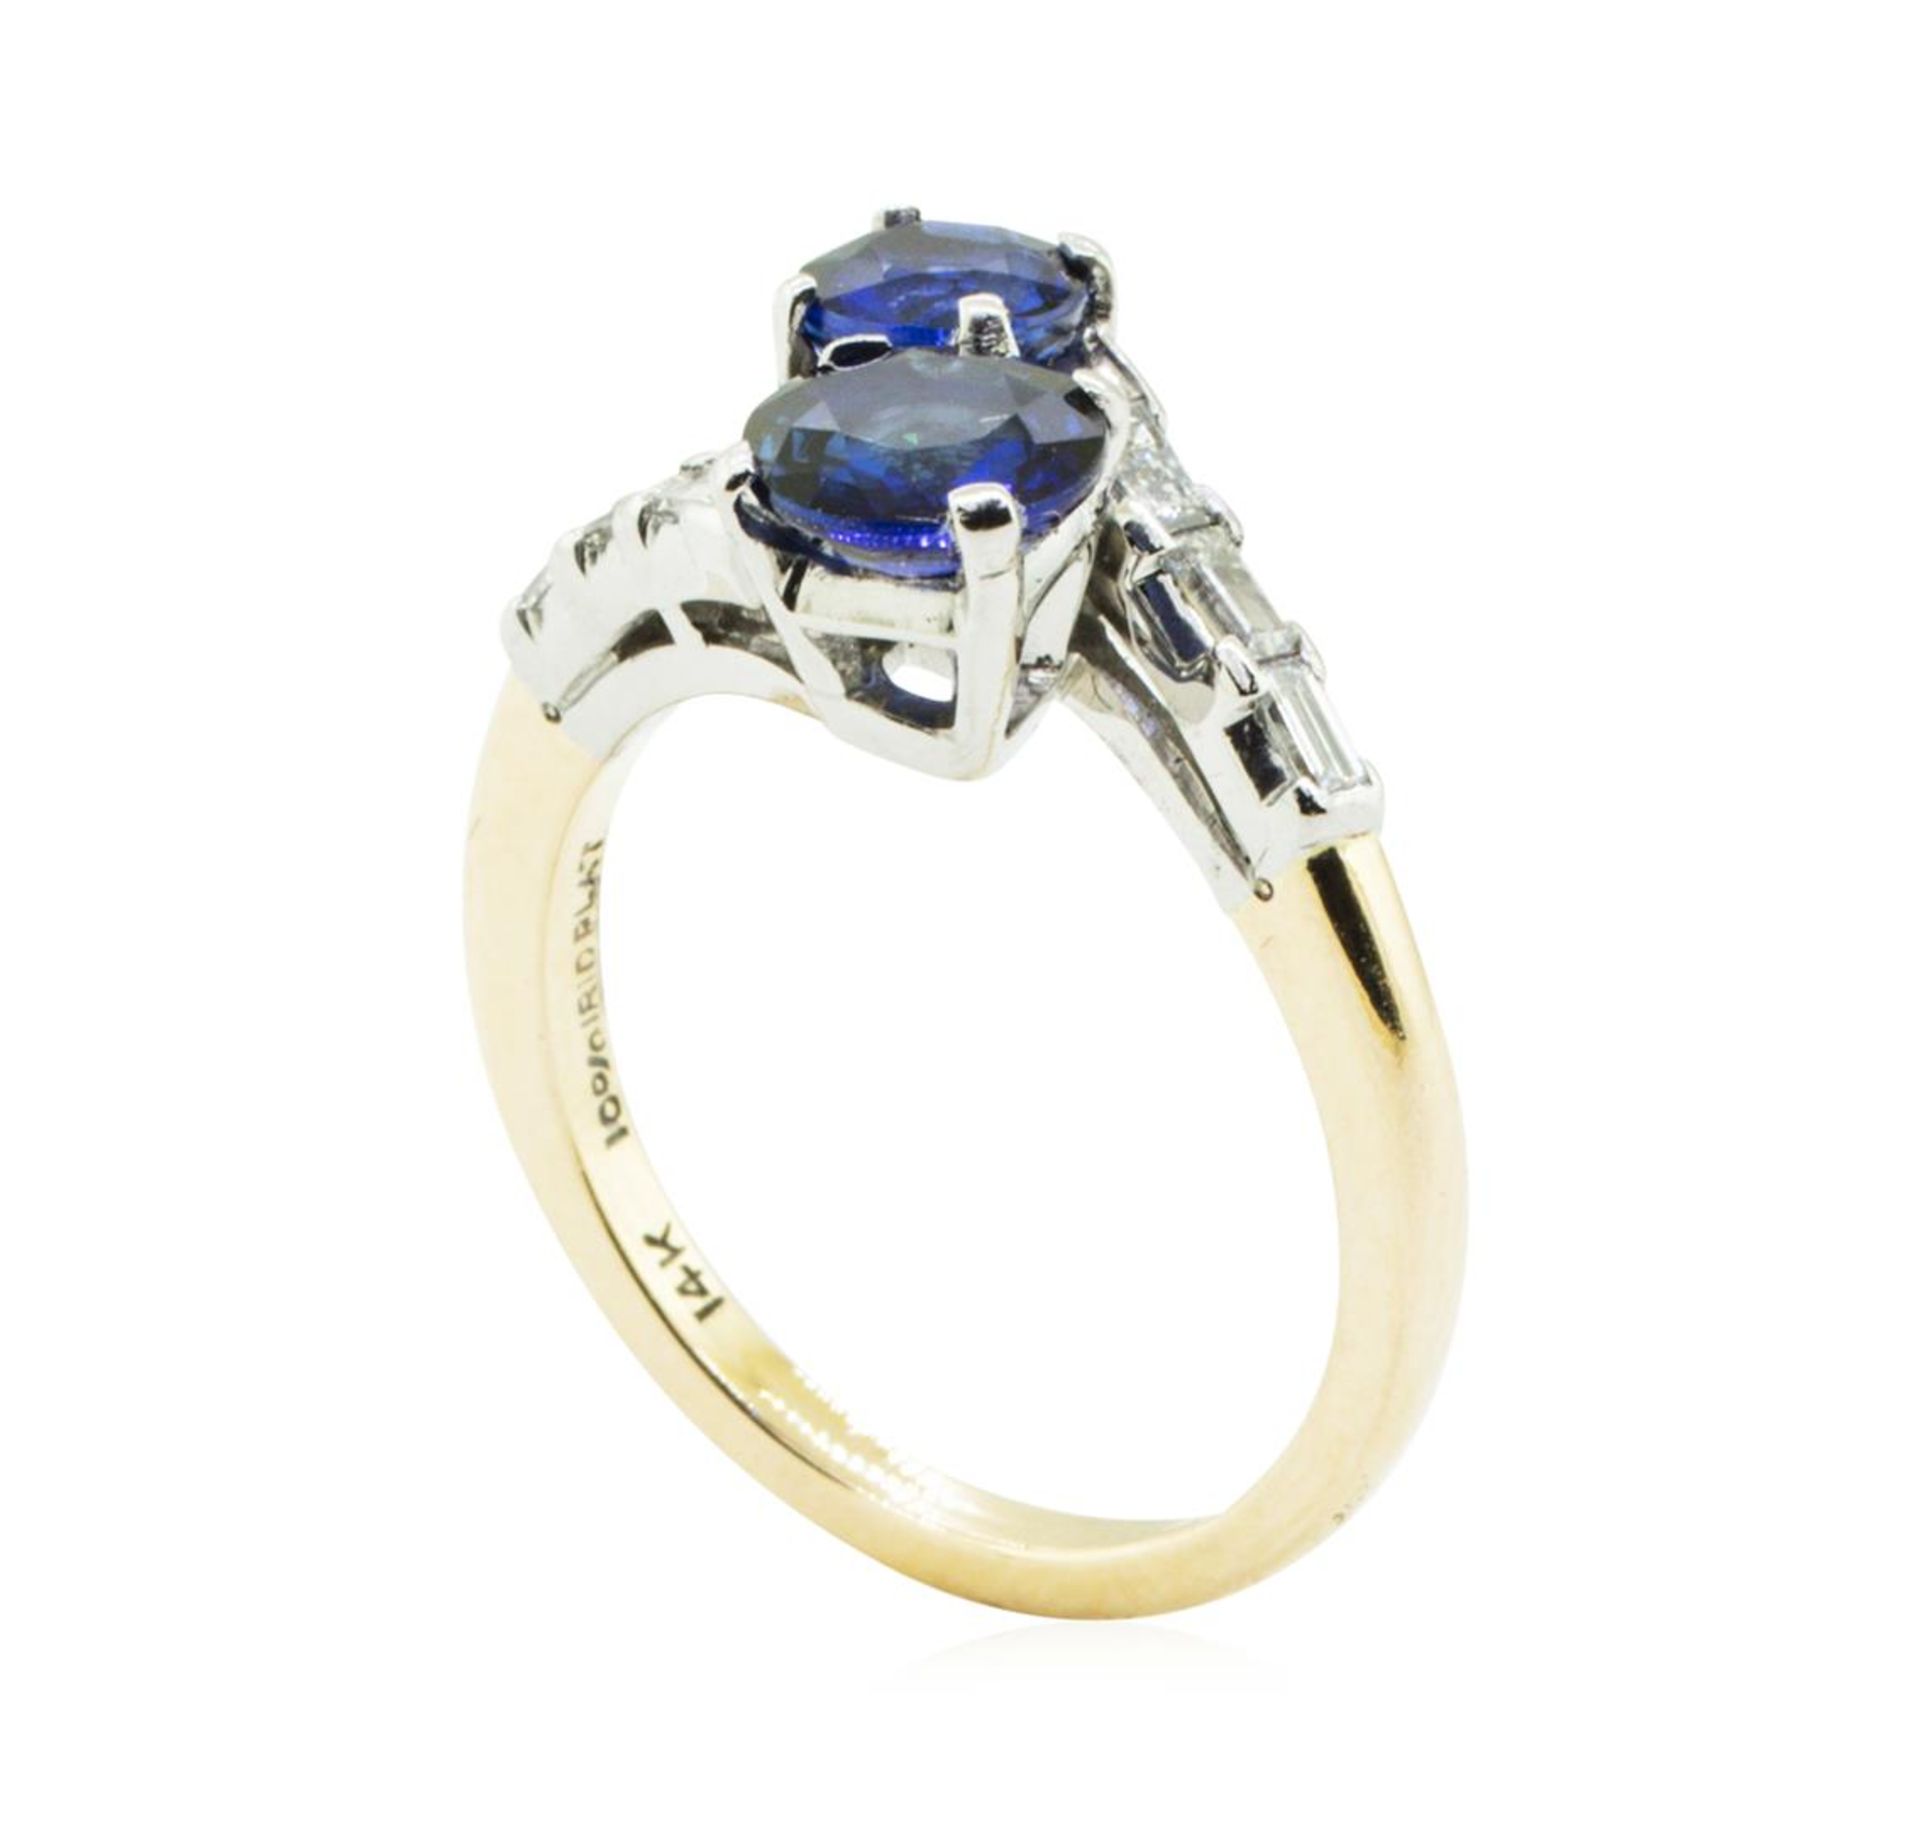 2.07 ctw Oval Brilliant Blue Sapphire Ring - 14KT Yellow Gold - Image 4 of 5